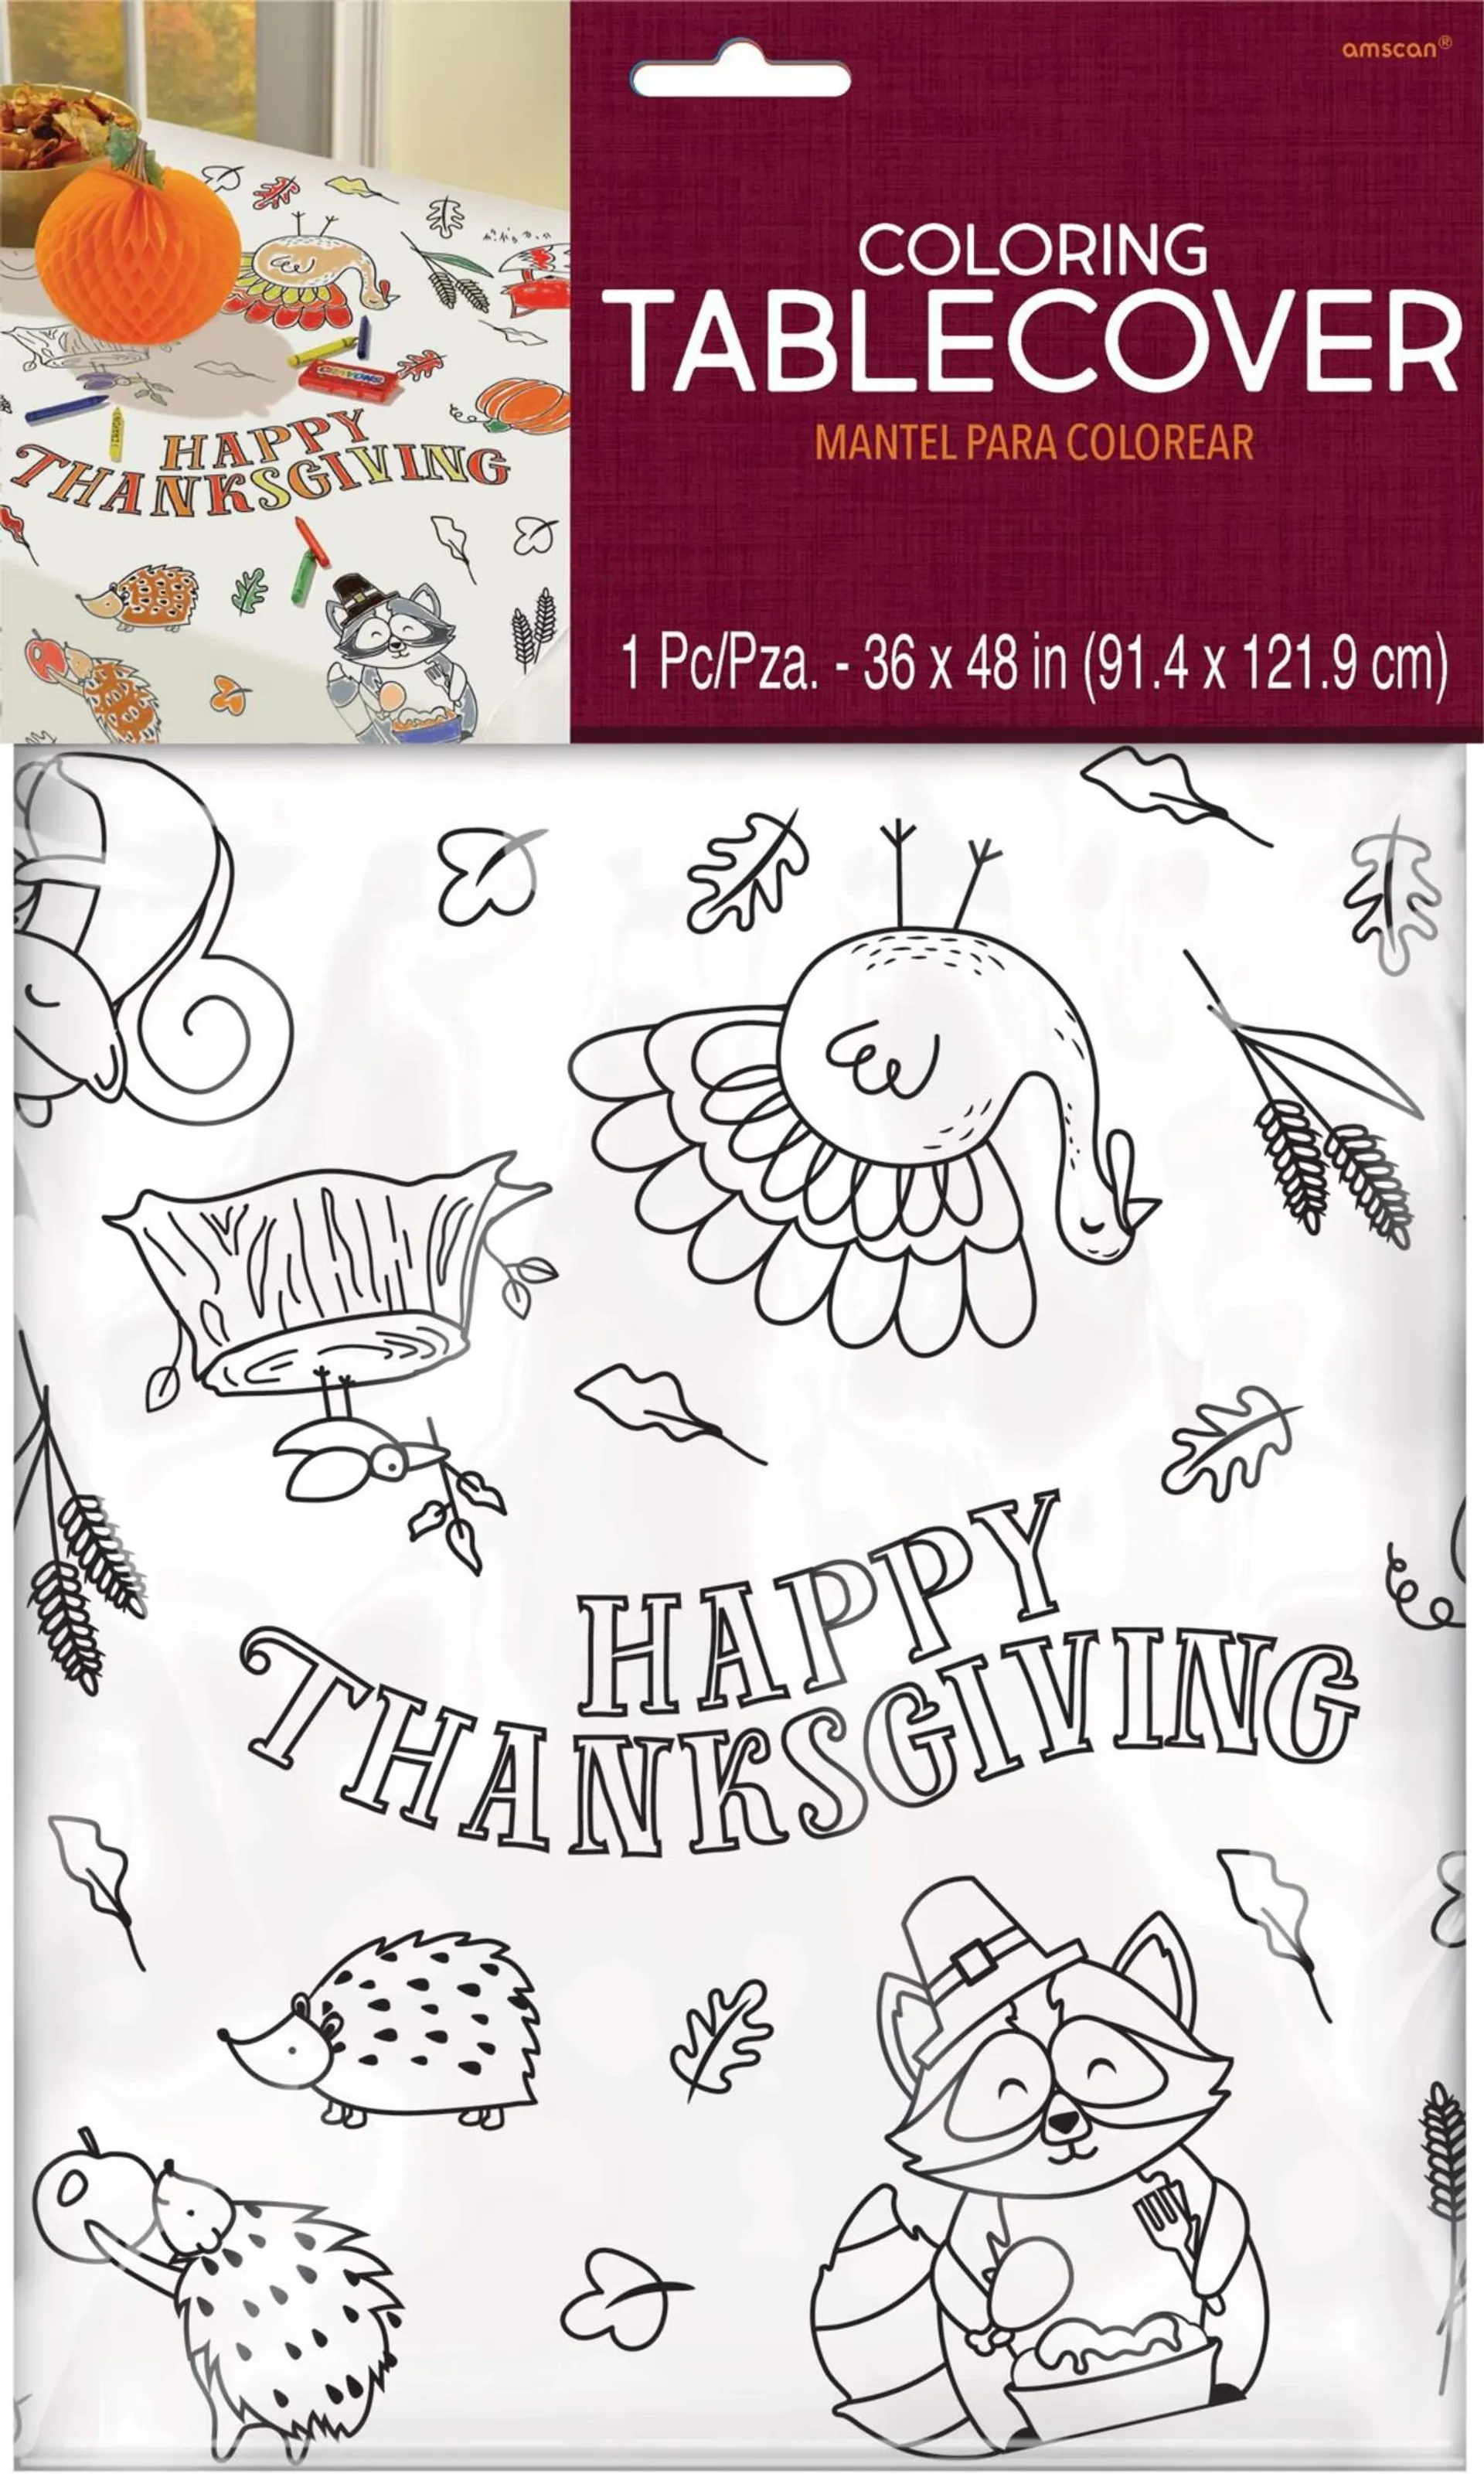 Turkey & Racoon Rectangle Customizable DIY Colouring Paper Table Cover, White, 48-in x 36-in, for Thanksgiving